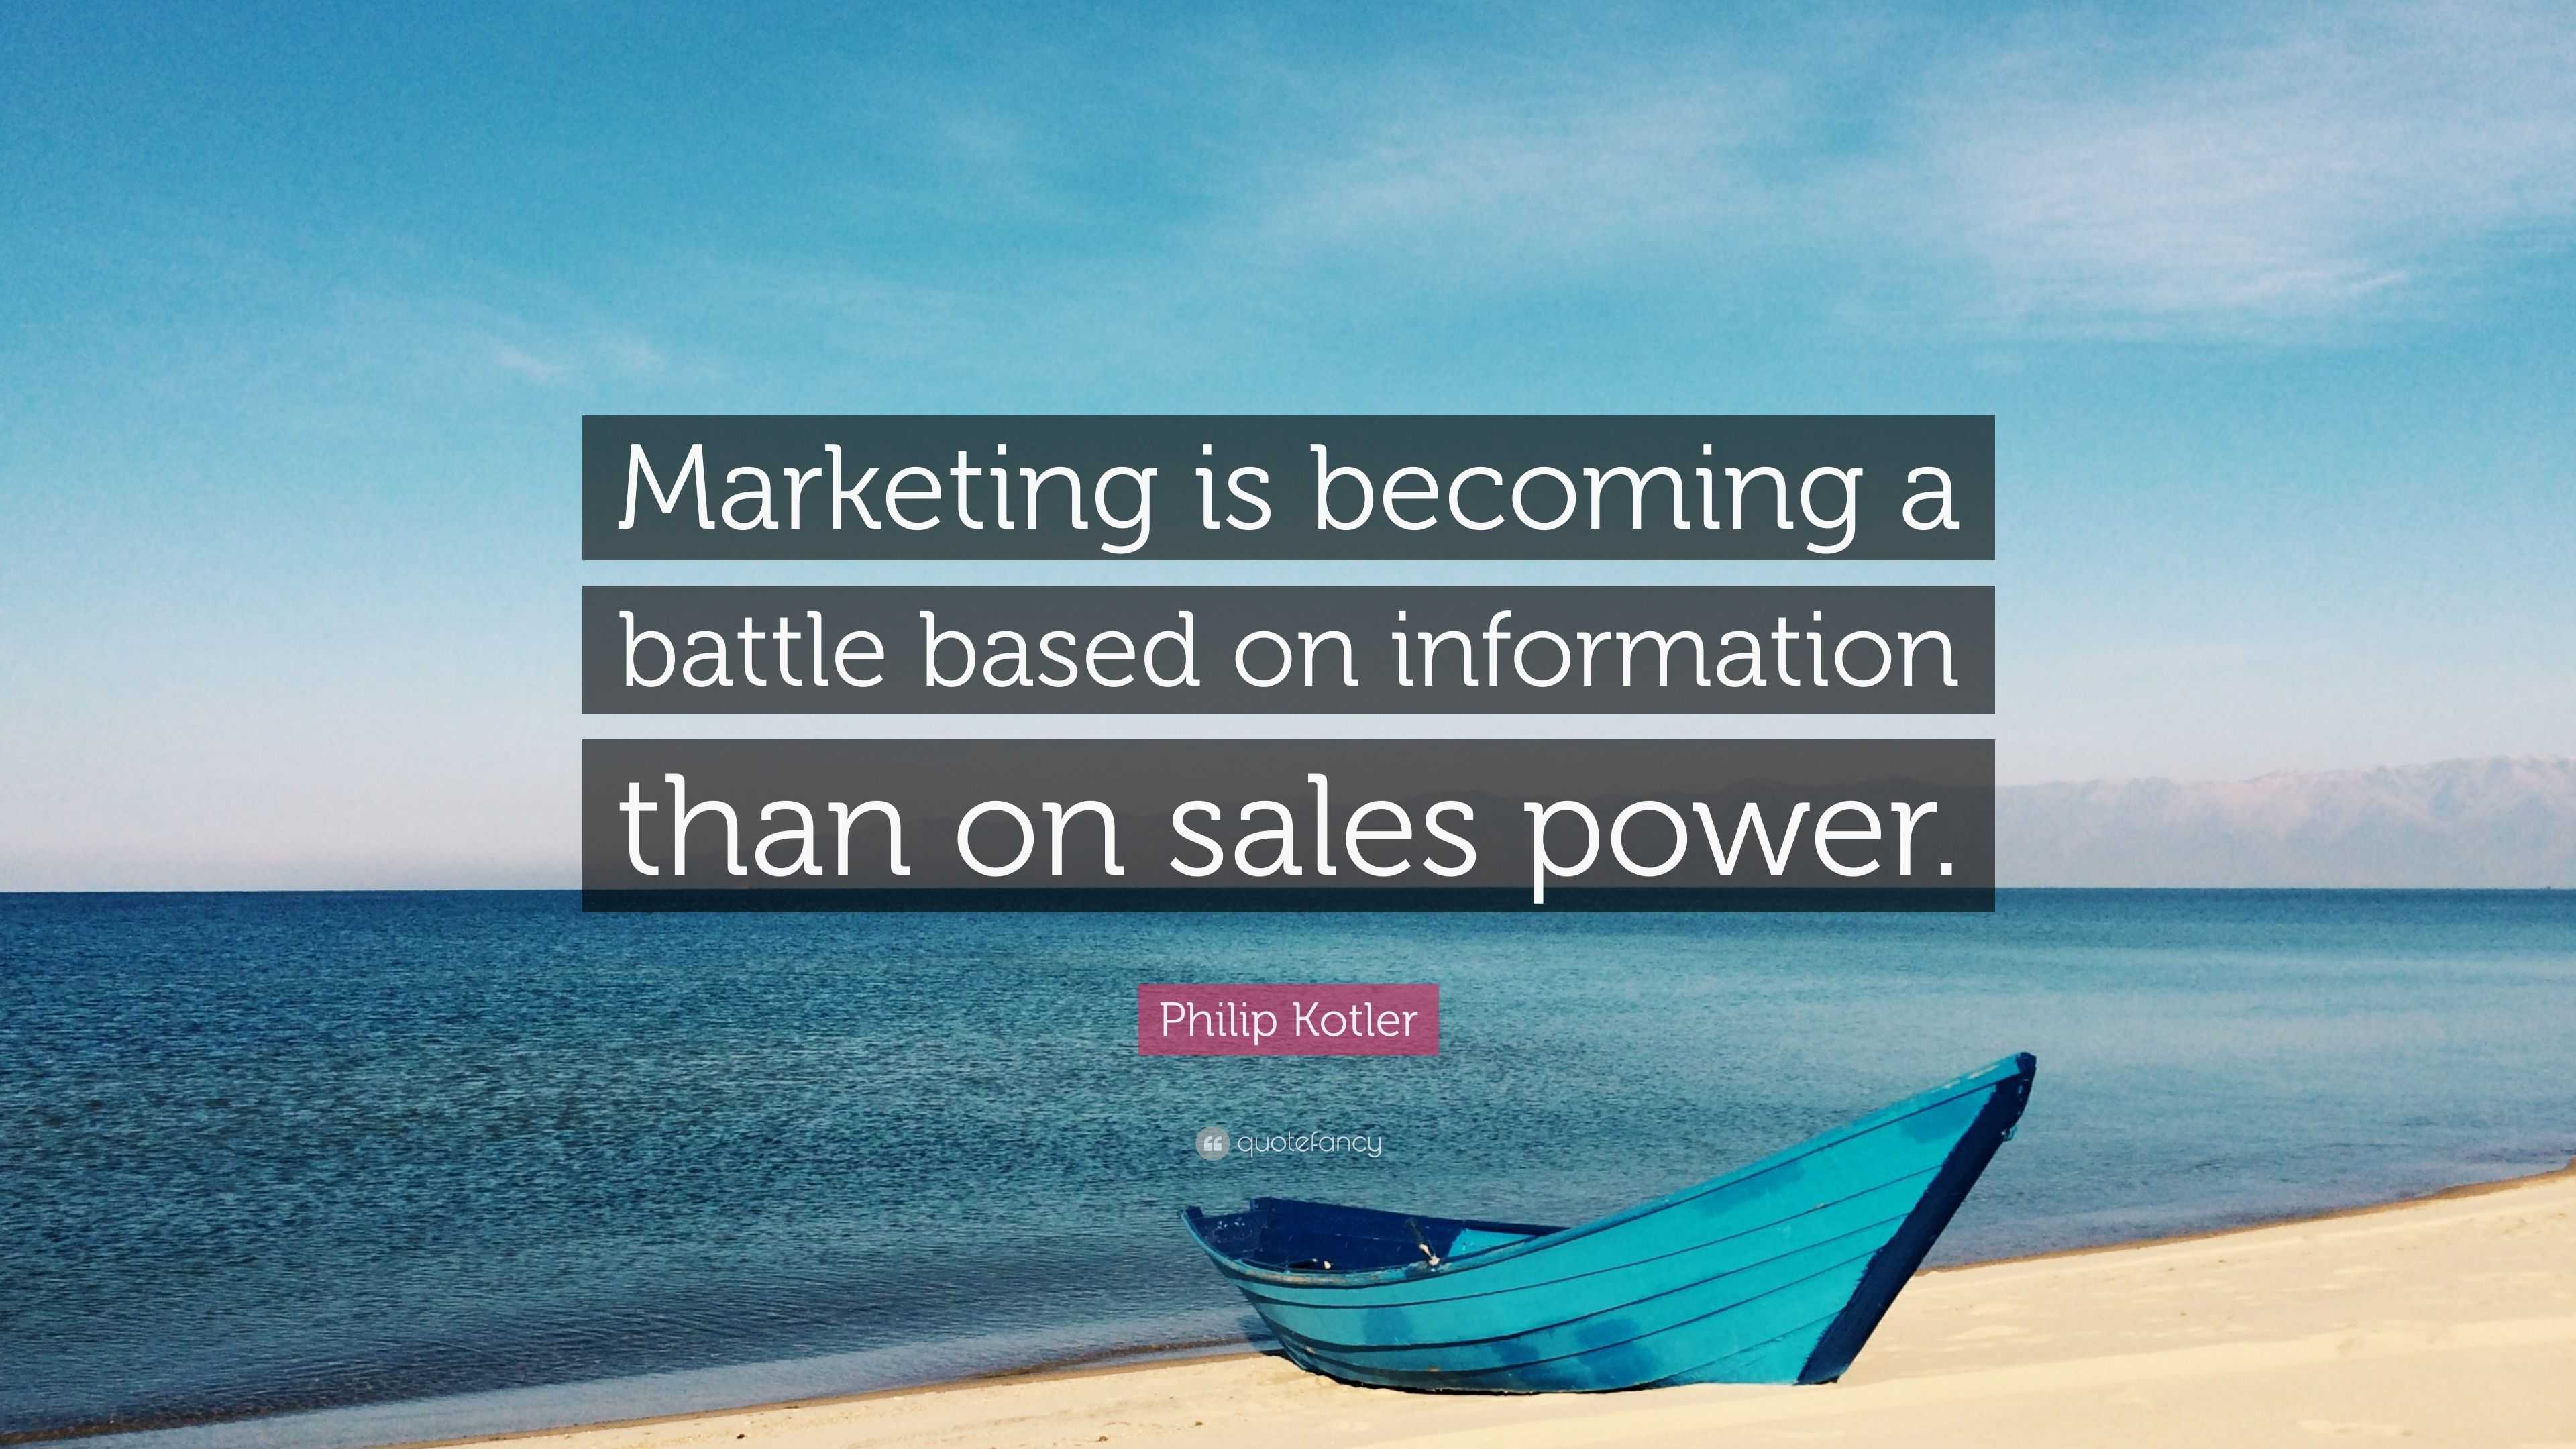 Philip Kotler Quote “Marketing is a battle based